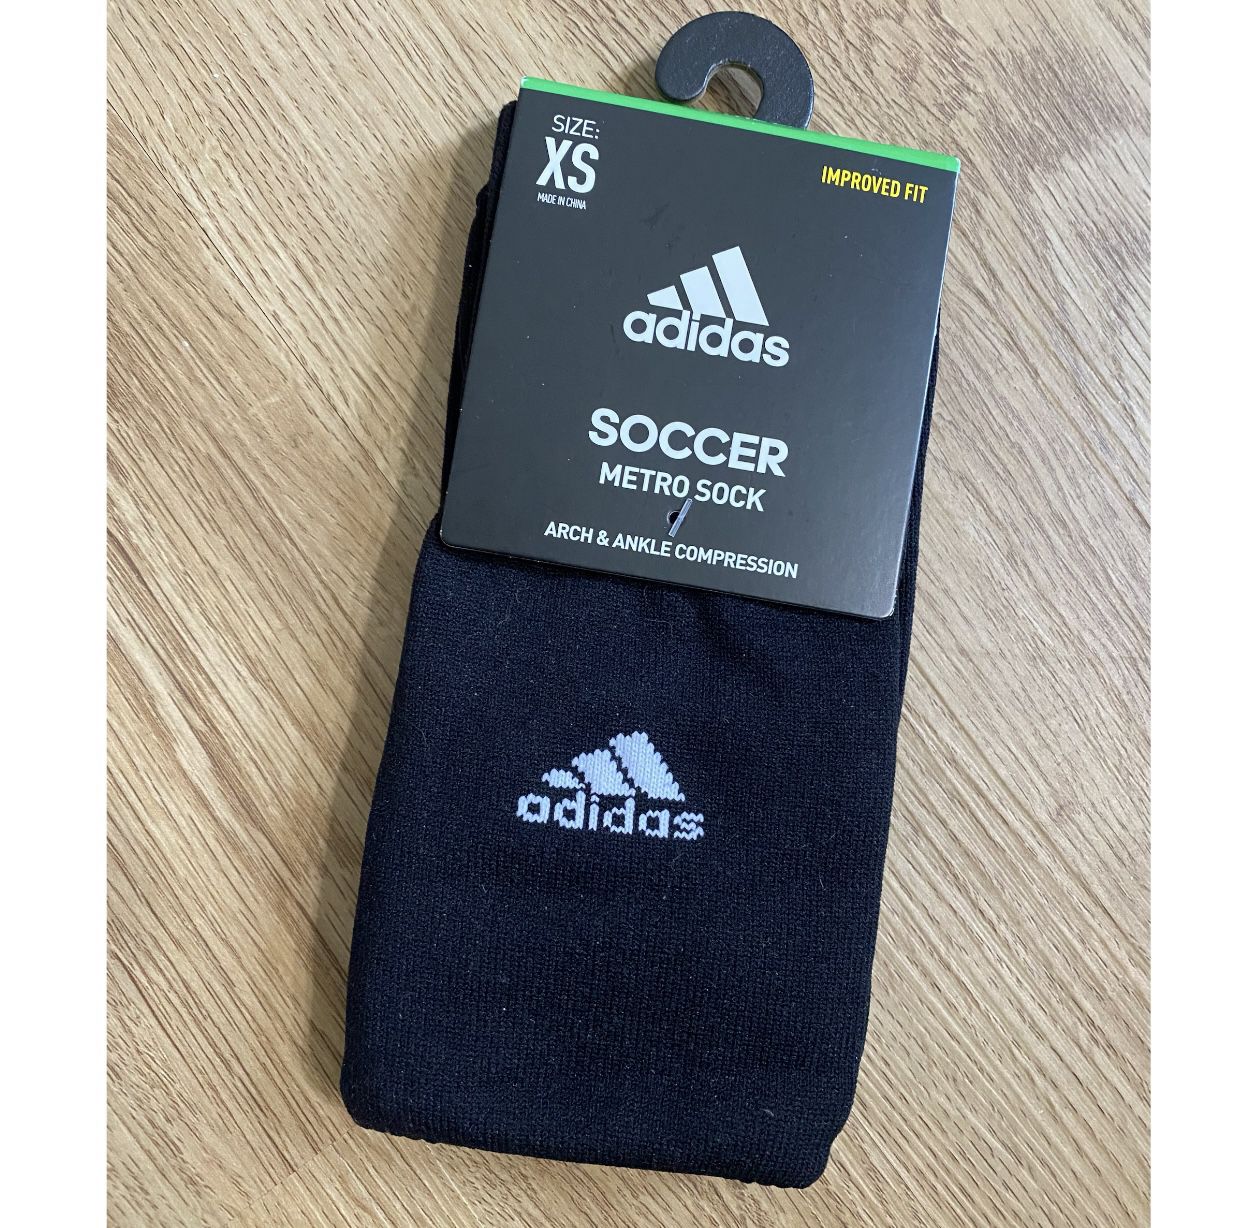 Brand new Adidas Soccer Metro Sock Compression Black Size XS Arch and Ankle